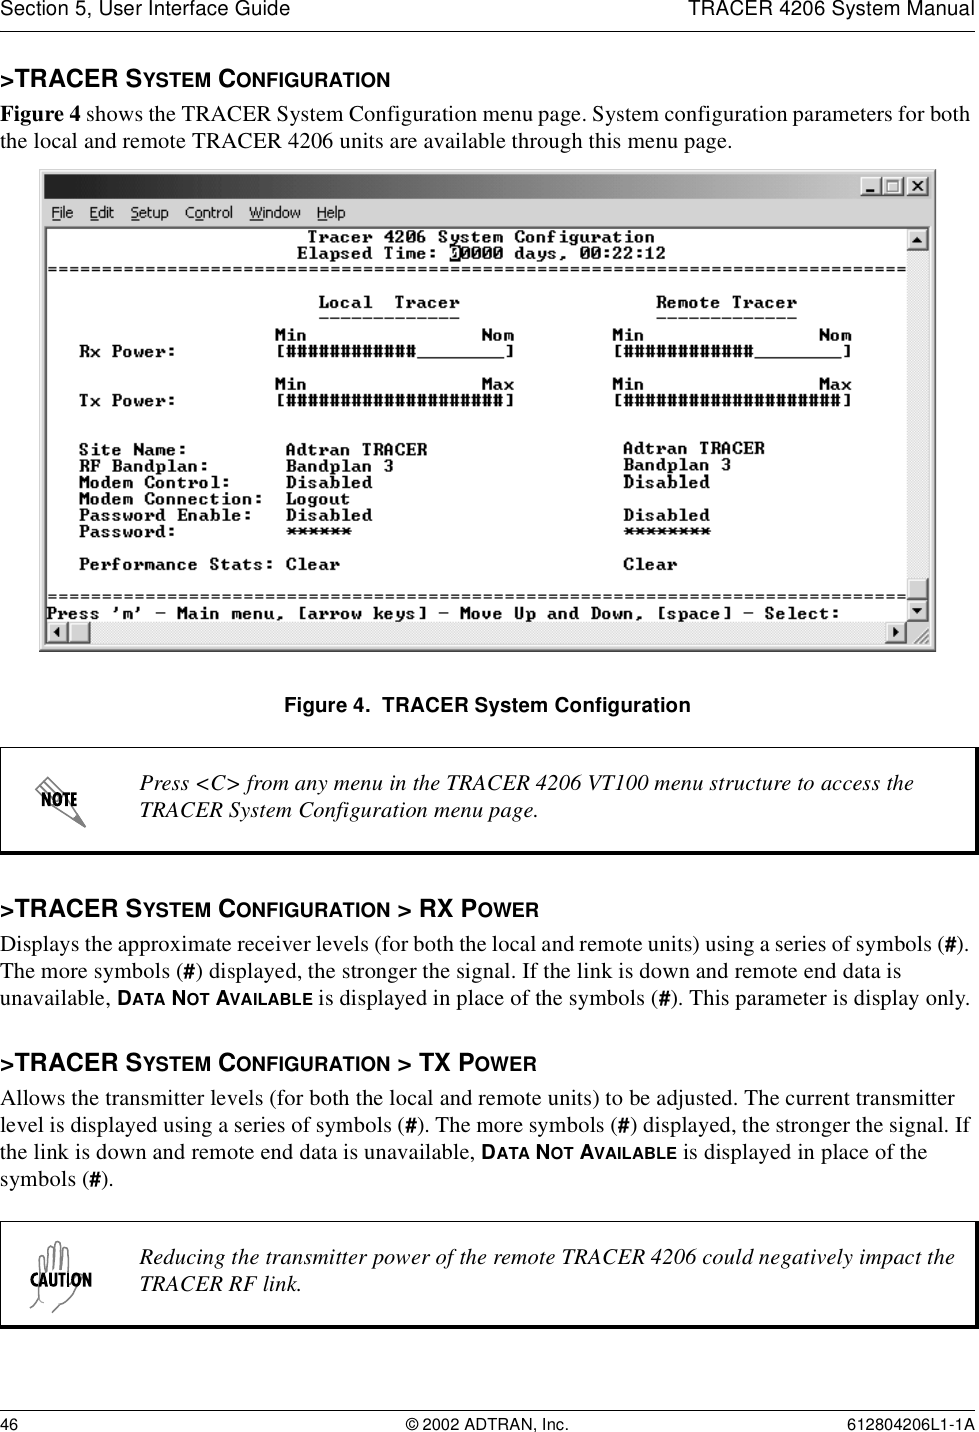 Section 5, User Interface Guide TRACER 4206 System Manual46 © 2002 ADTRAN, Inc. 612804206L1-1A&gt;TRACER SYSTEM CONFIGURATIONFigure 4 shows the TRACER System Configuration menu page. System configuration parameters for both the local and remote TRACER 4206 units are available through this menu page.Figure 4.  TRACER System Configuration&gt;TRACER SYSTEM CONFIGURATION &gt; RX POWERDisplays the approximate receiver levels (for both the local and remote units) using a series of symbols (#). The more symbols (#) displayed, the stronger the signal. If the link is down and remote end data is unavailable, DATA NOT AVAILABLE is displayed in place of the symbols (#). This parameter is display only.&gt;TRACER SYSTEM CONFIGURATION &gt; TX POWERAllows the transmitter levels (for both the local and remote units) to be adjusted. The current transmitter level is displayed using a series of symbols (#). The more symbols (#) displayed, the stronger the signal. If the link is down and remote end data is unavailable, DATA NOT AVAILABLE is displayed in place of the symbols (#).Press &lt;C&gt; from any menu in the TRACER 4206 VT100 menu structure to access the TRACER System Configuration menu page.Reducing the transmitter power of the remote TRACER 4206 could negatively impact the TRACER RF link.